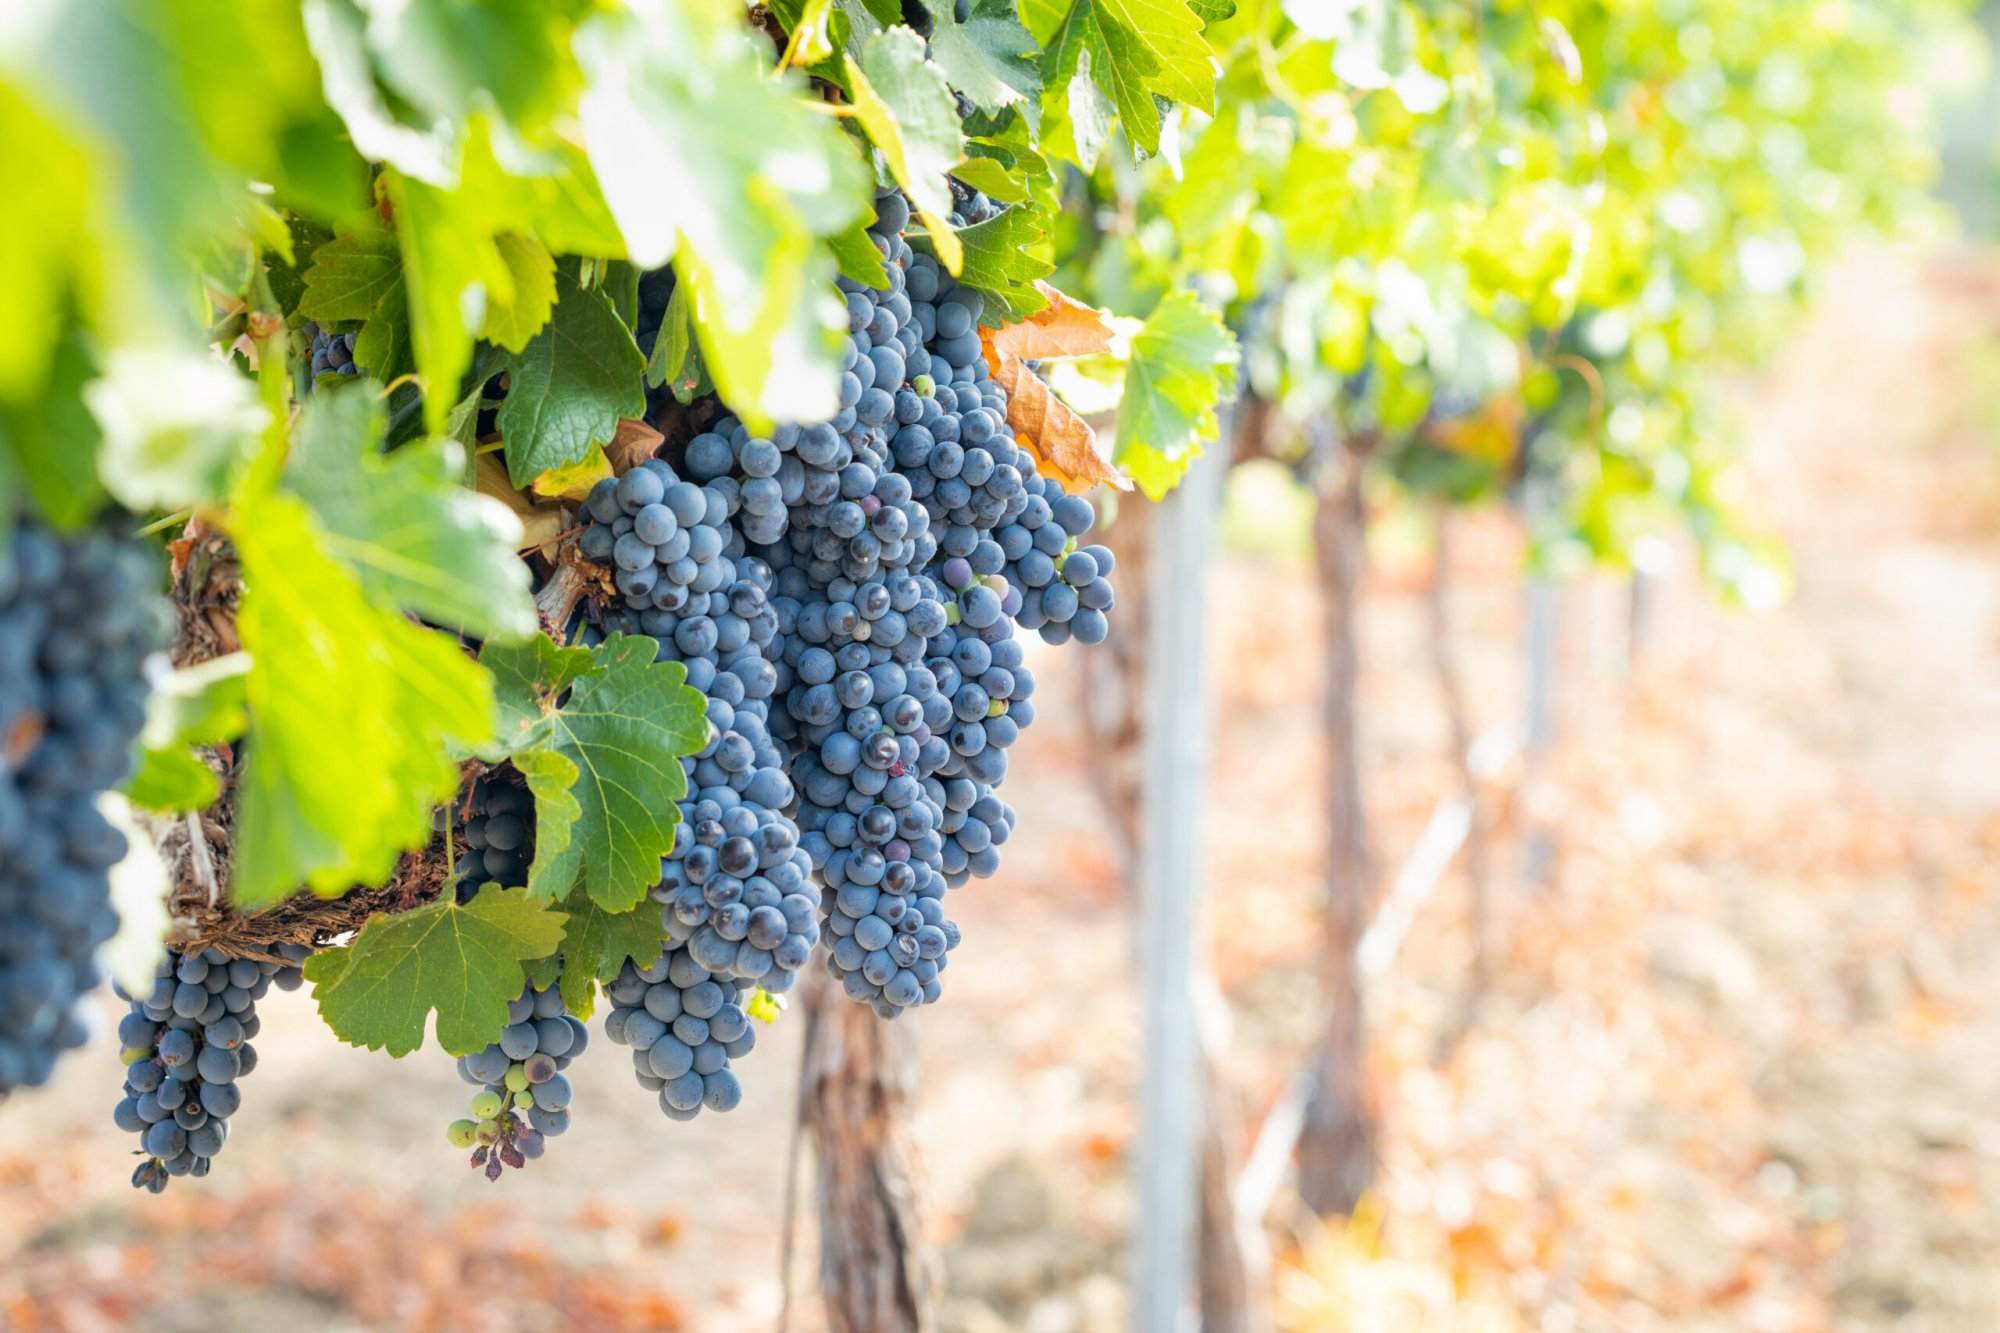 Grapes hanging on a vine in a vineyard.